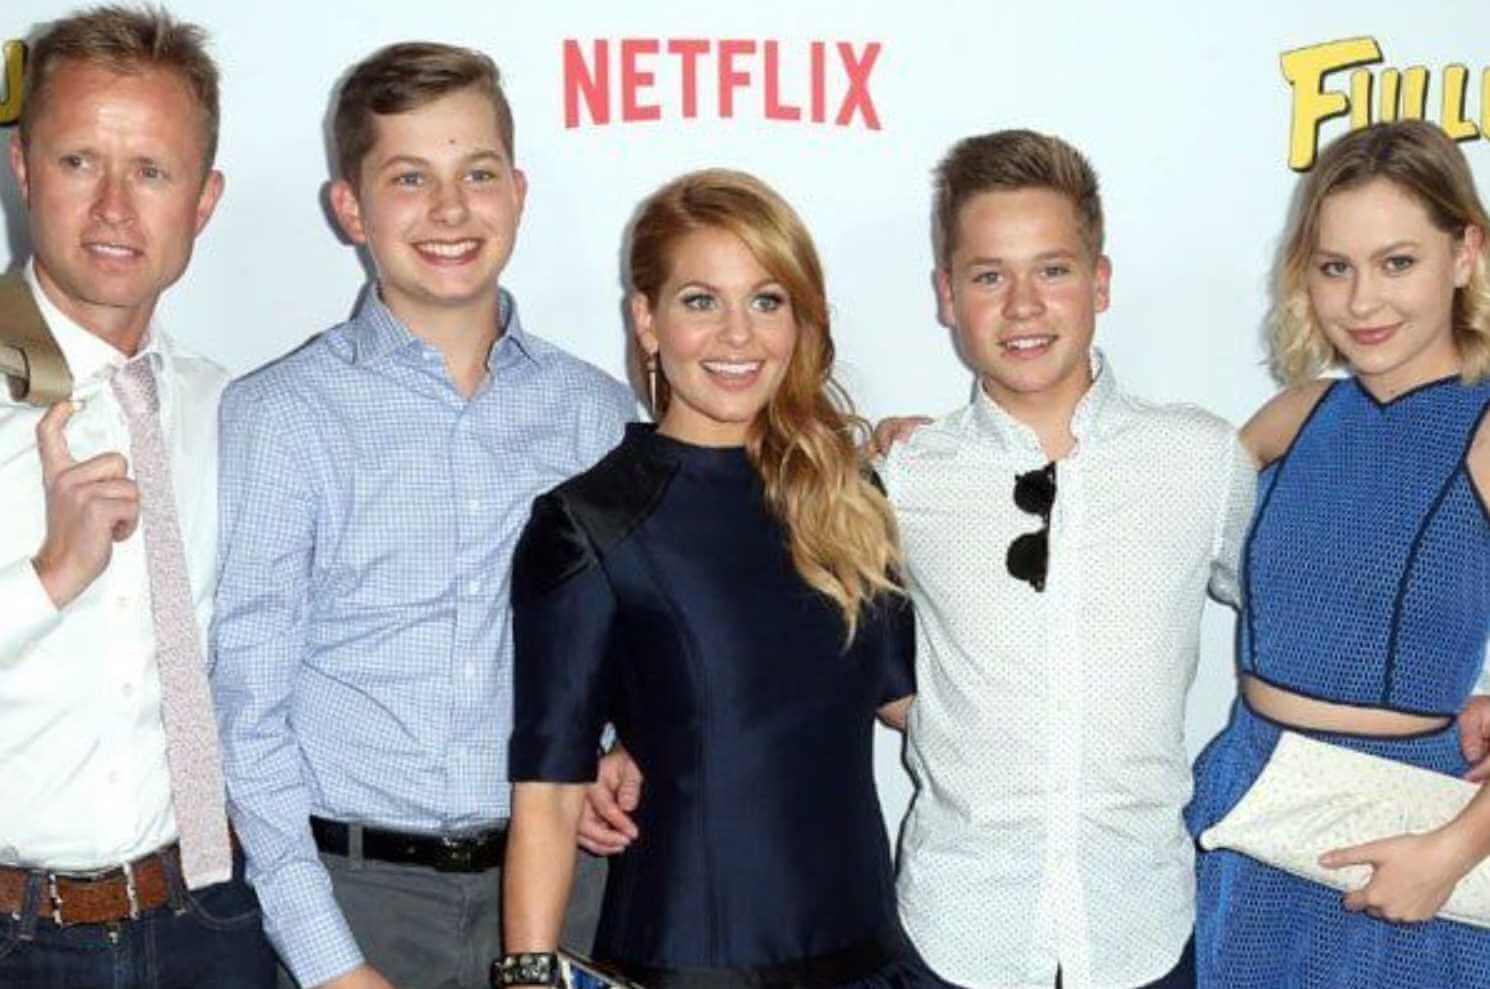 Candace Cameron Bure with her Family Photo